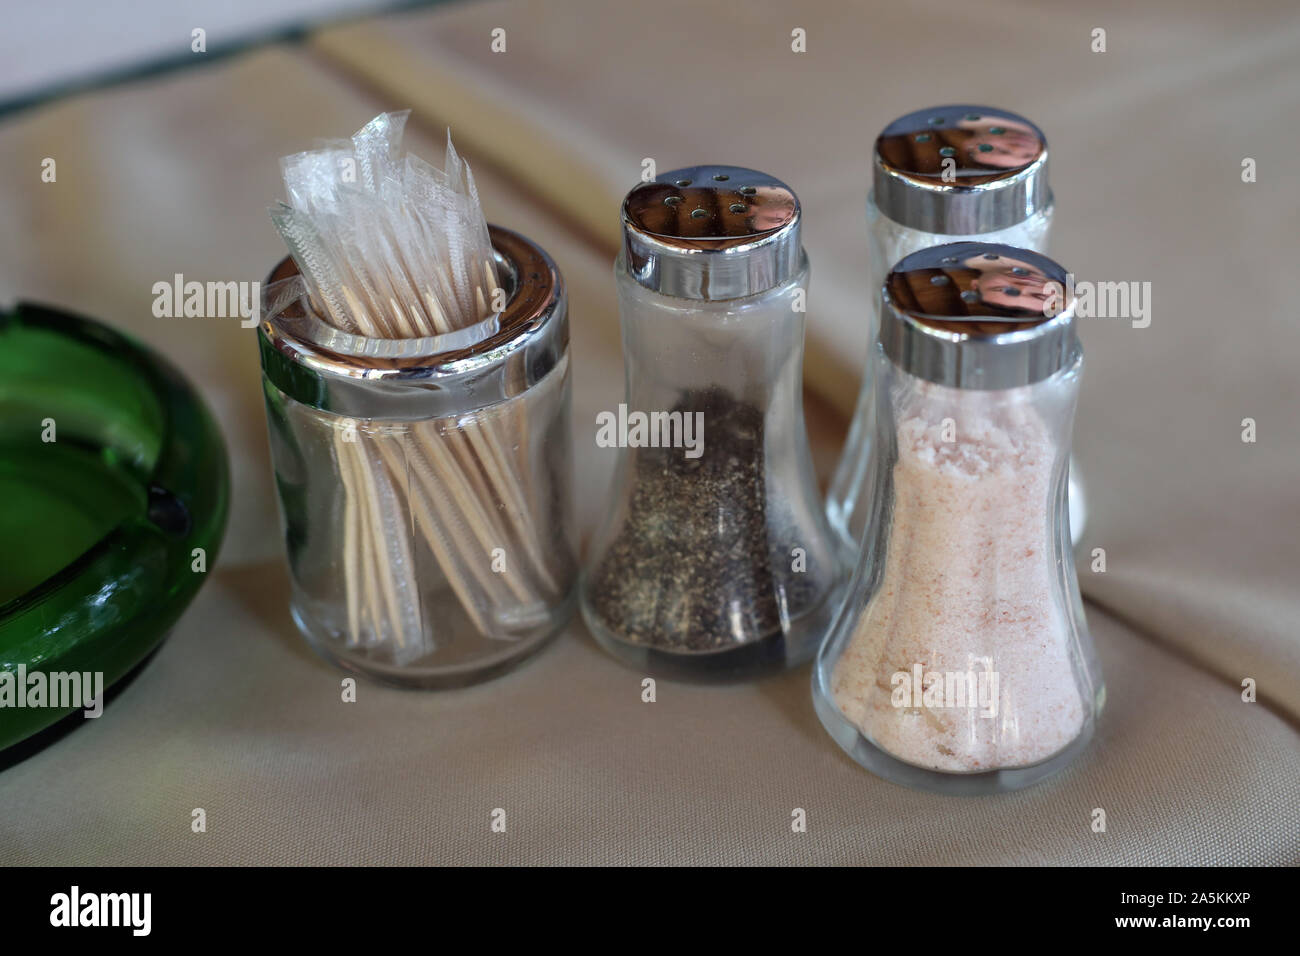 Sugar, salt and pepper shakers made of glass and some toothpicks on a table with beige table cloth. Closeup color image of kitchen details. Stock Photo